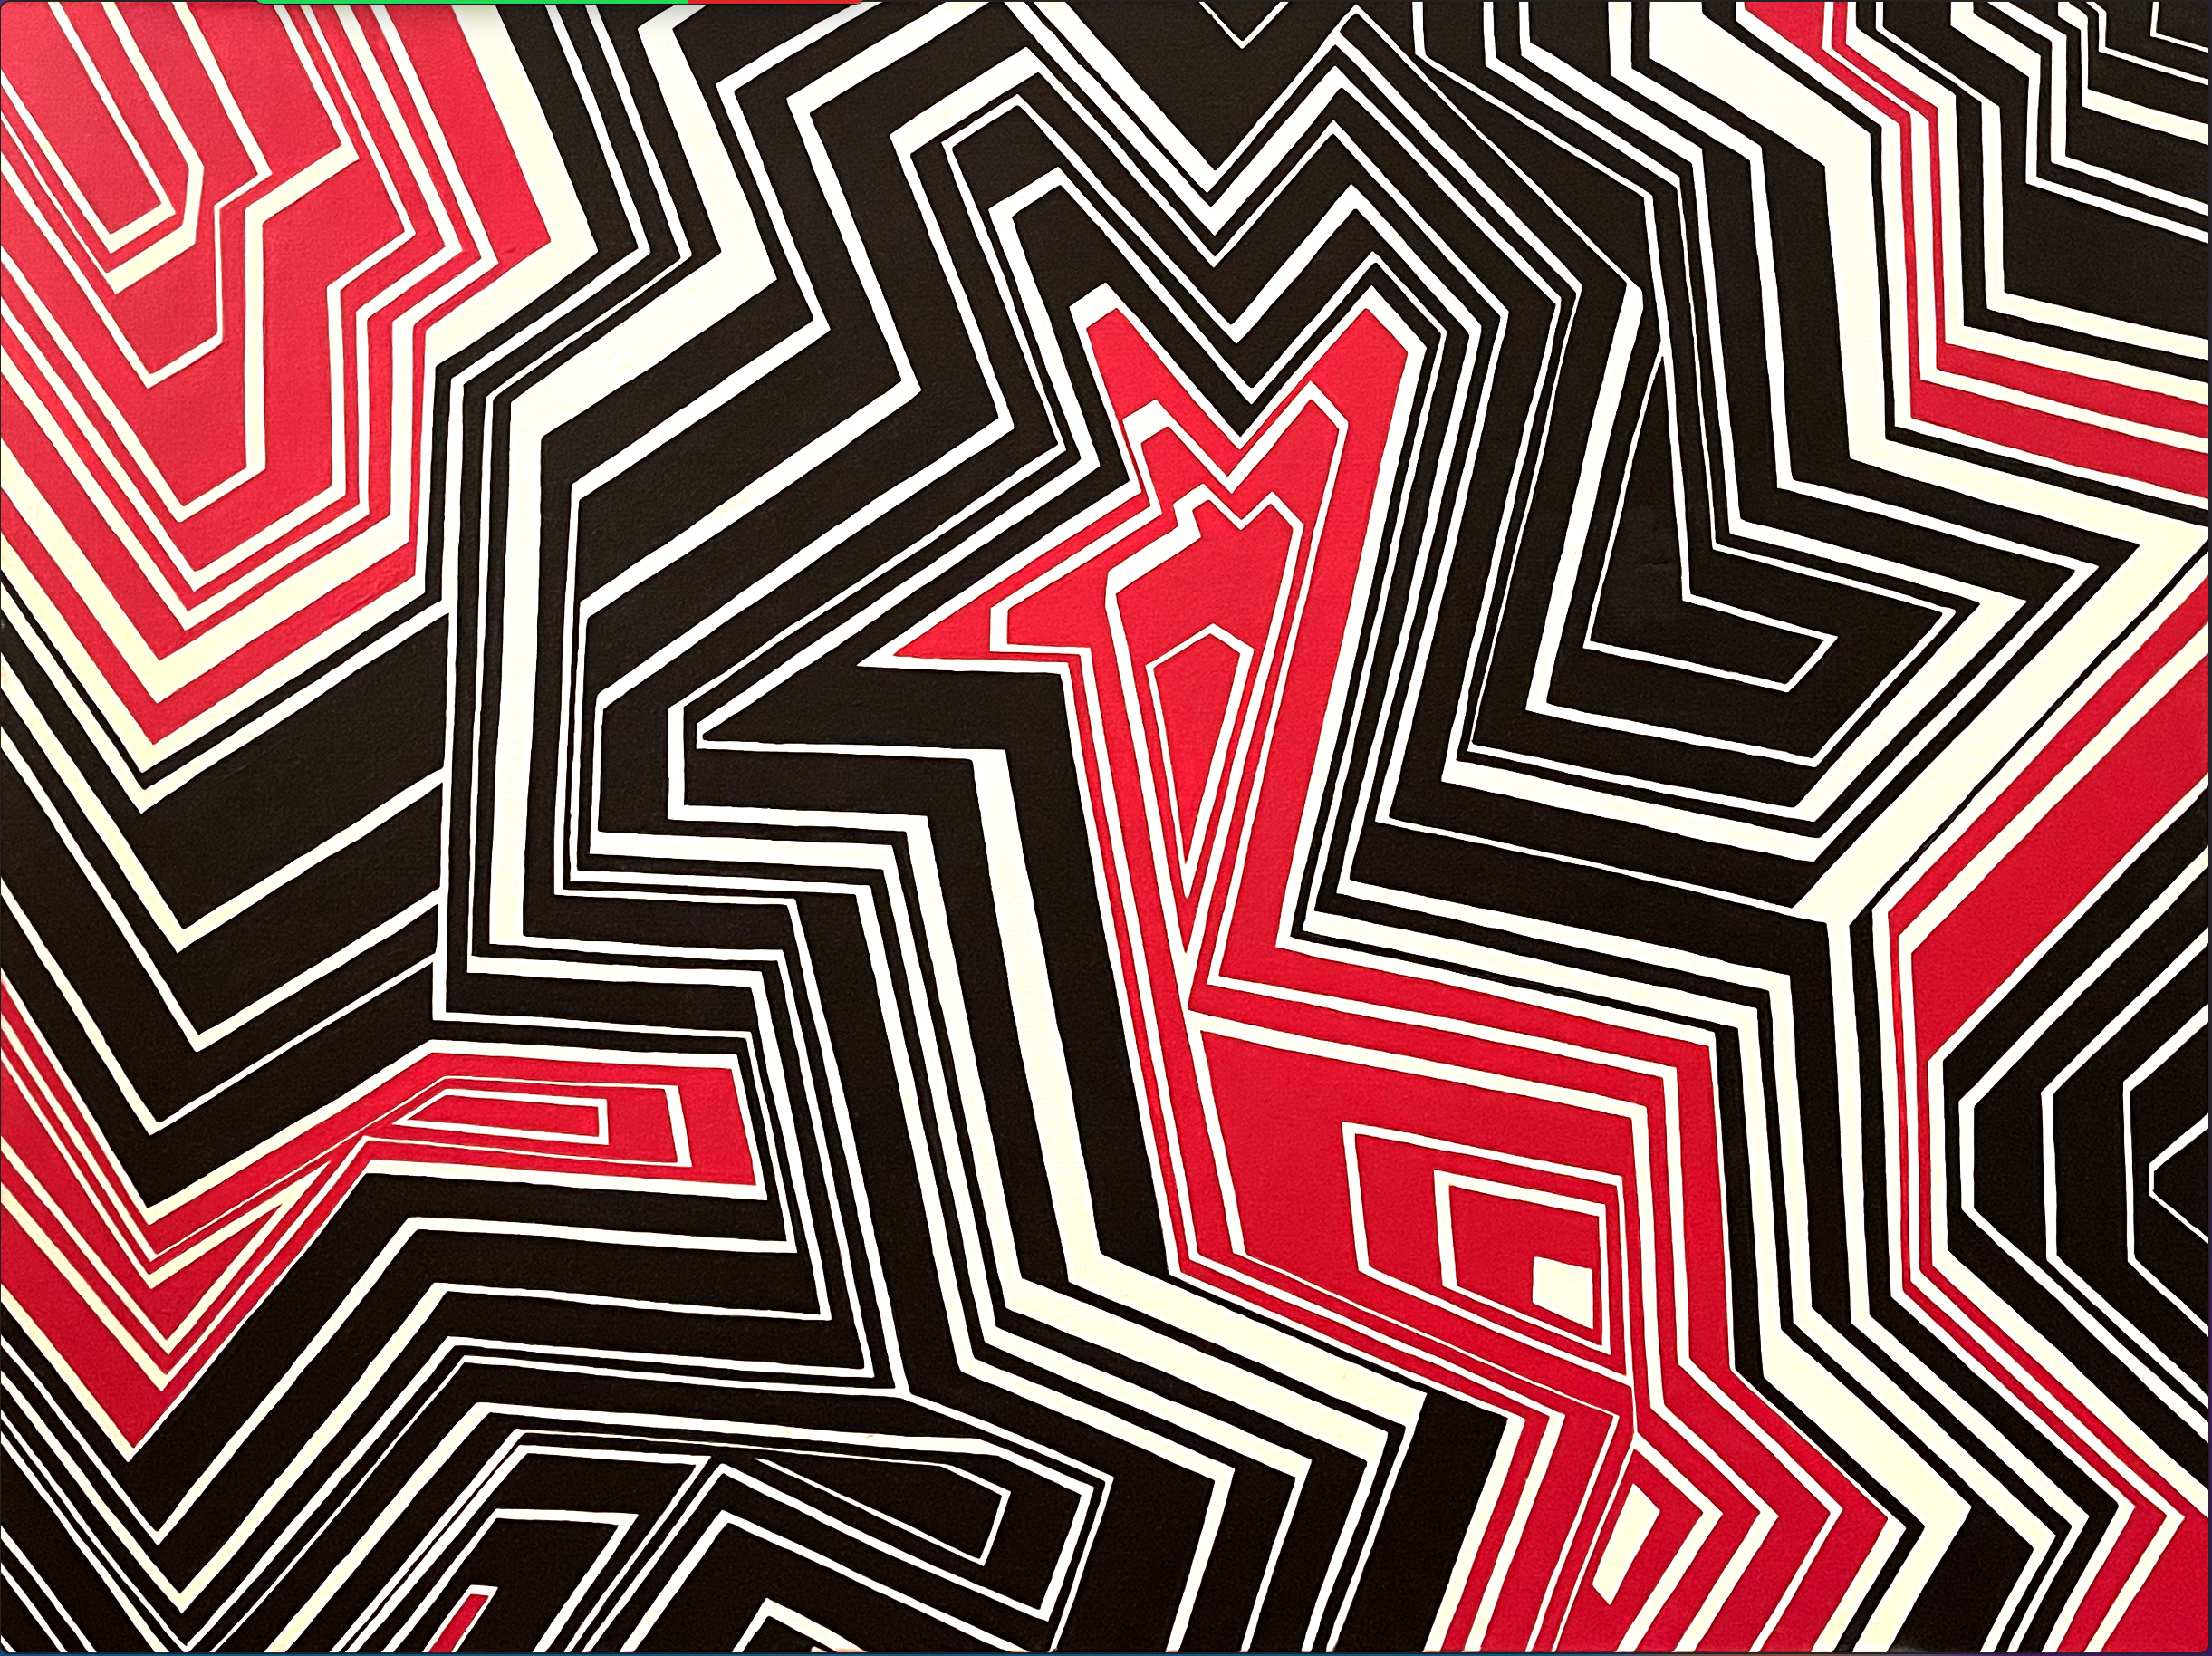 Asf paintings abstract black red 001 web danfyh